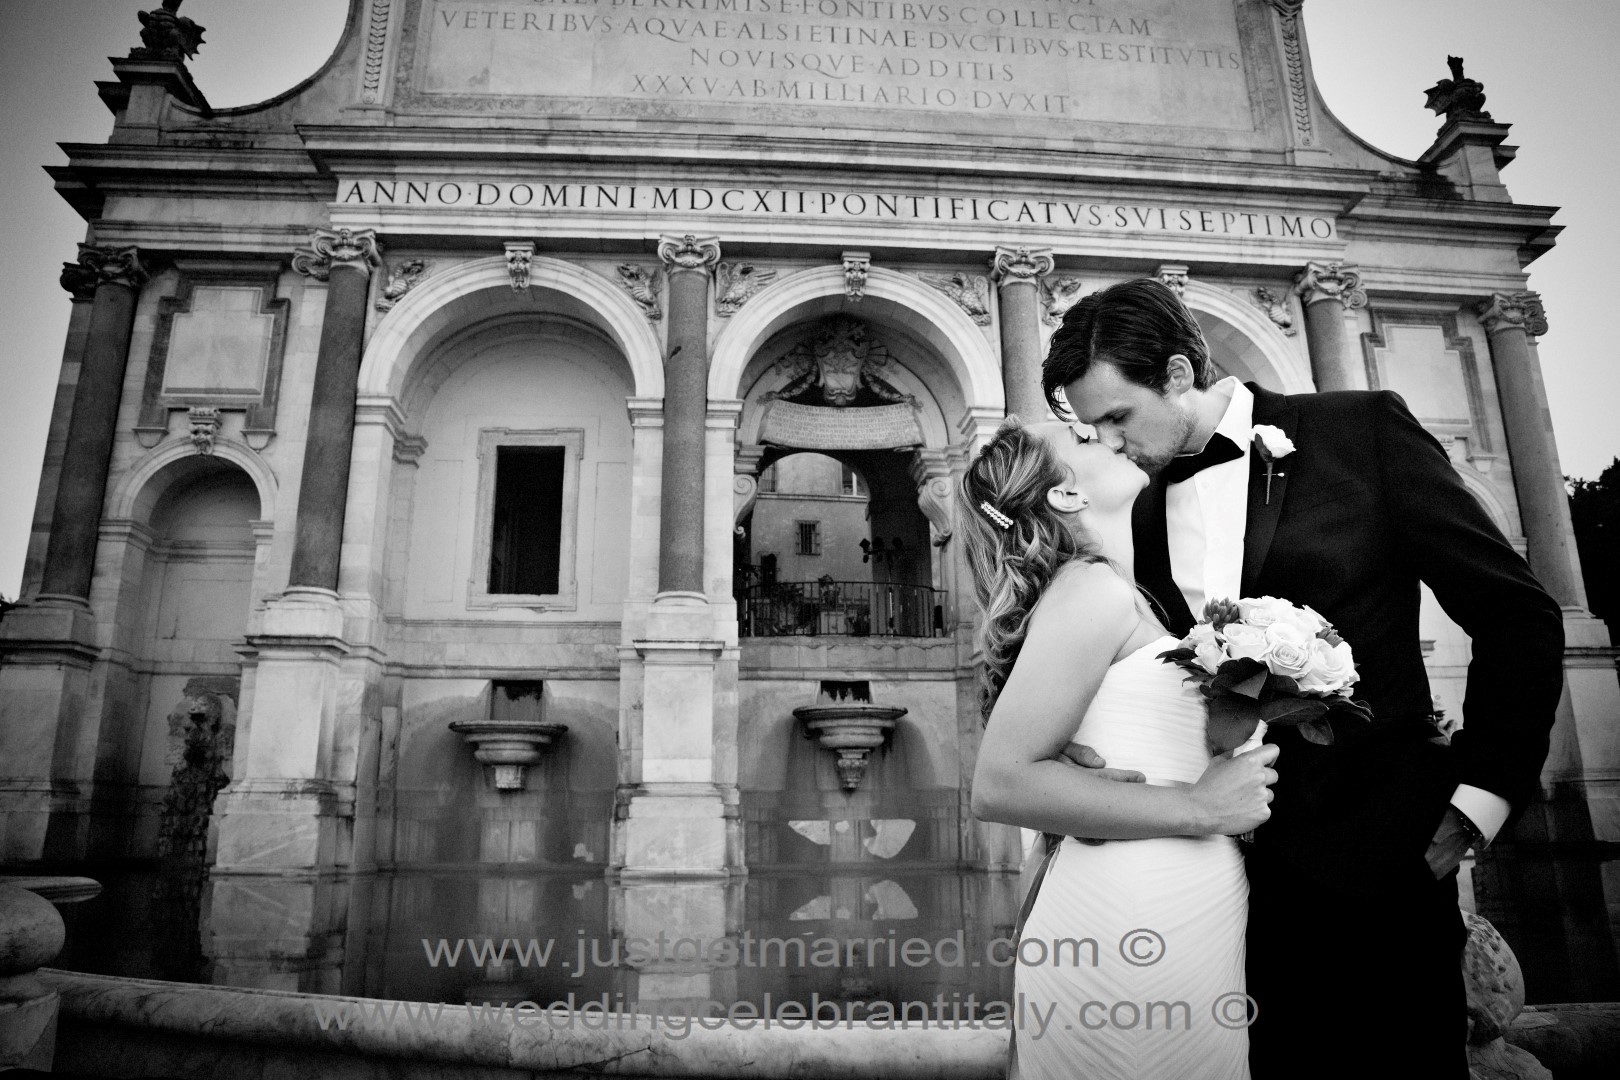 wedding elope package in rome, ceremony in italy, getting married eloping rome